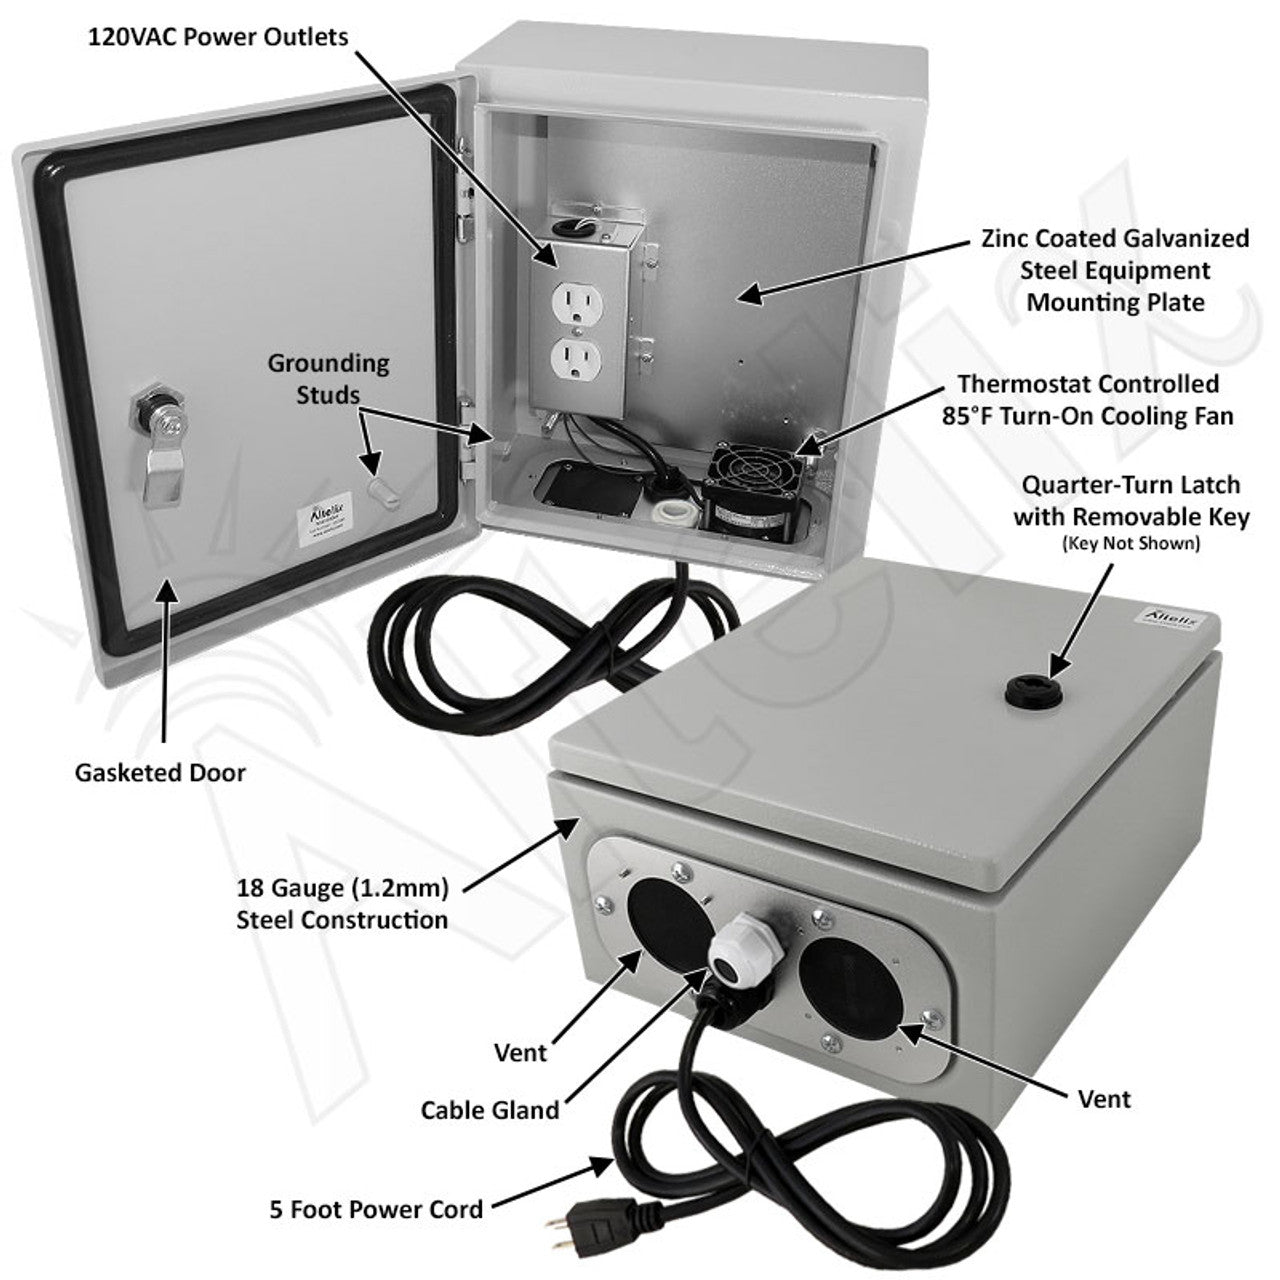 Altelix Steel Weatherproof NEMA Enclosure with 120 VAC Outlets, Power Cord & 85°F Turn-On Cooling Fan - 0